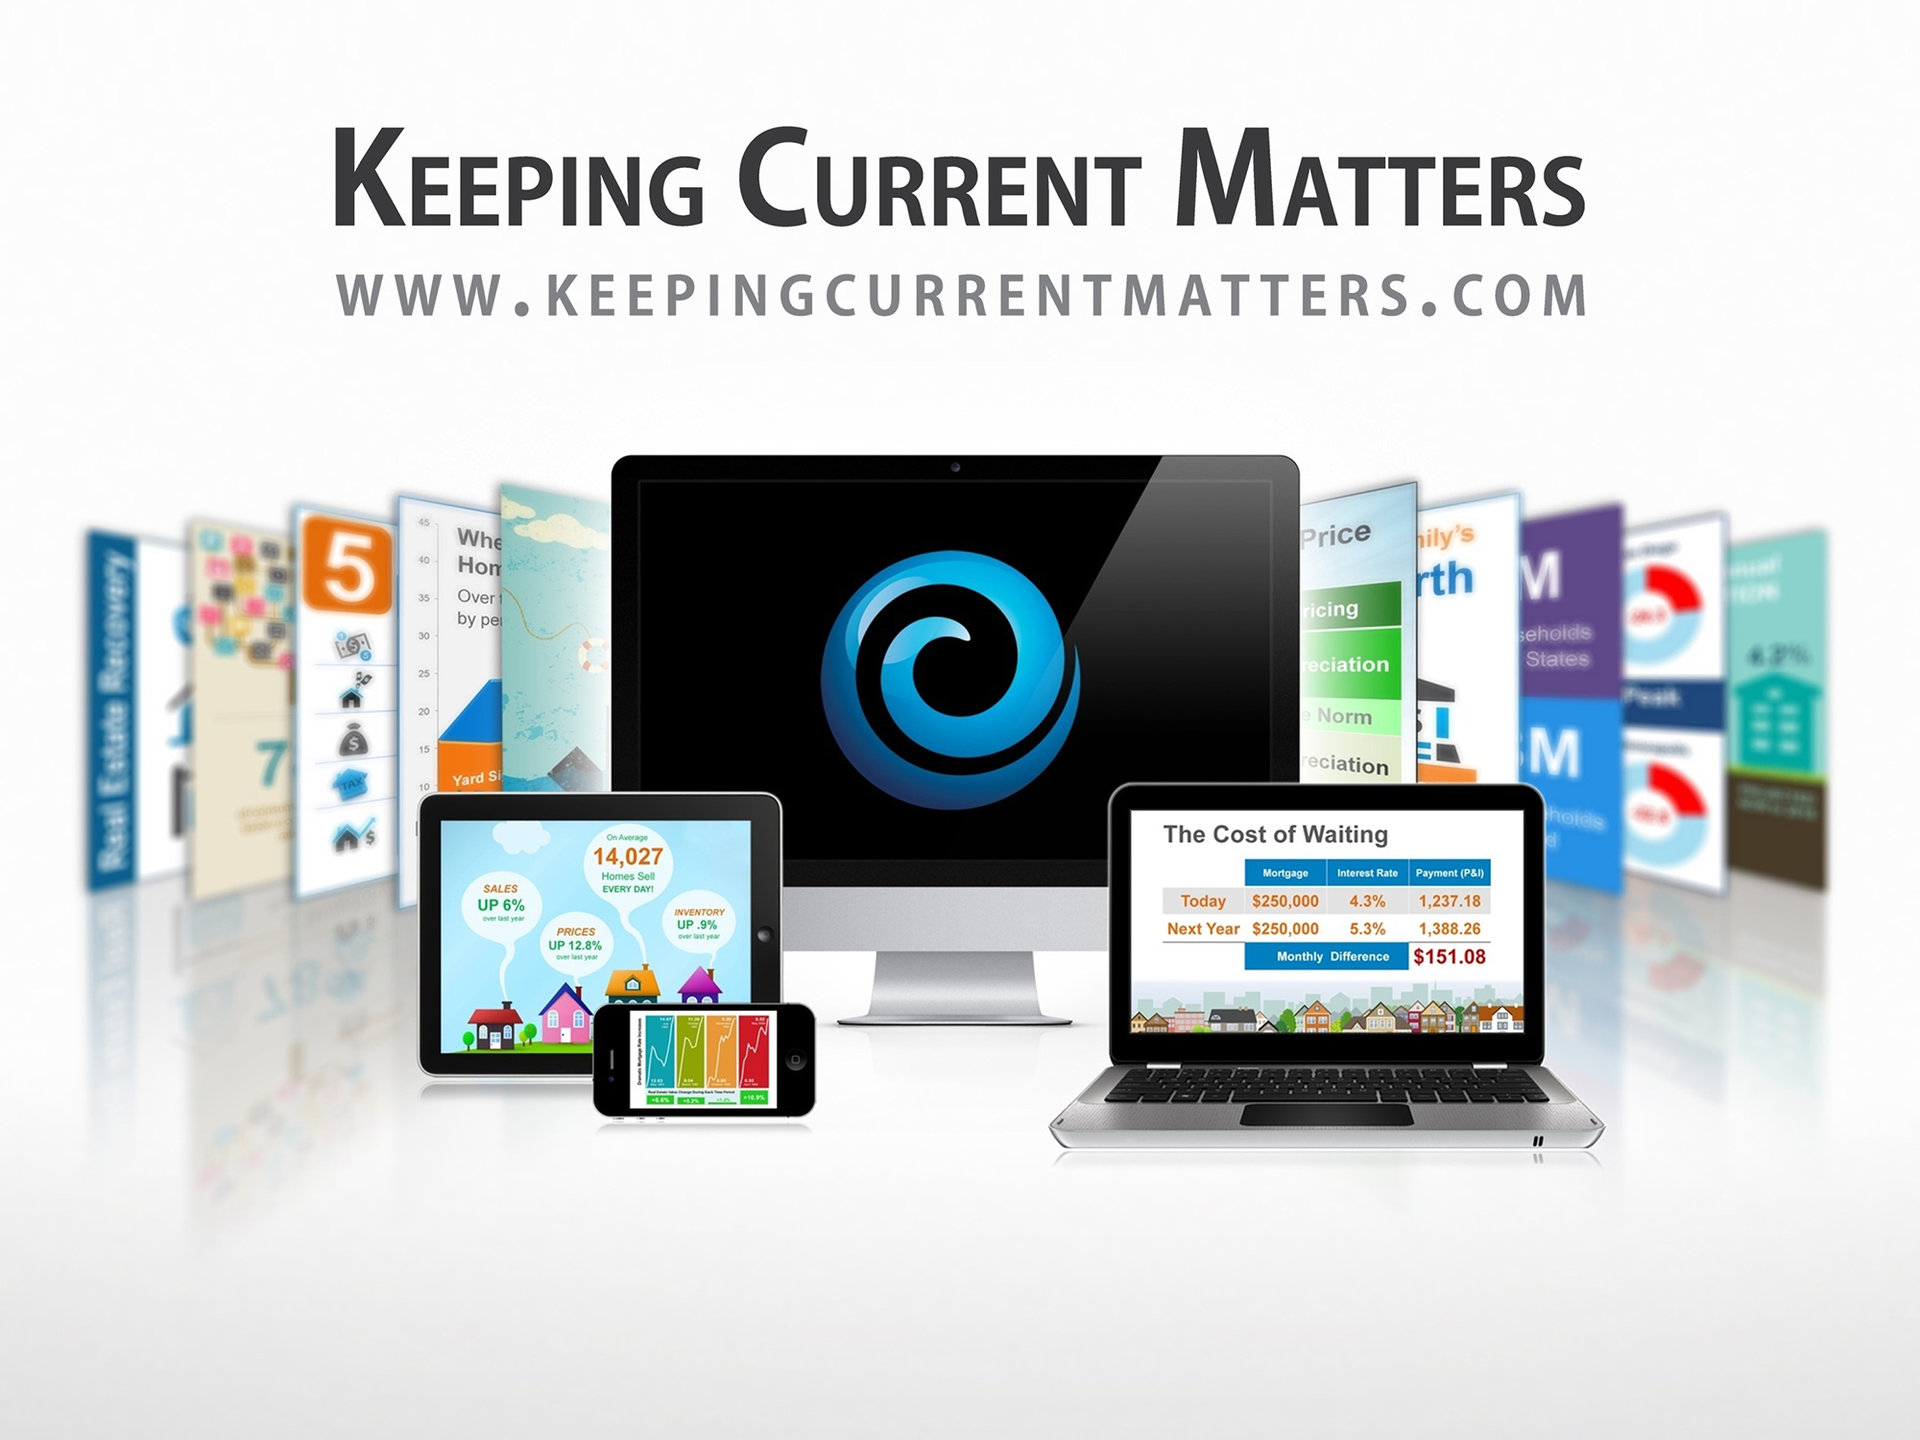 Start Your Free 14-Day Trial | Keeping Current Matters